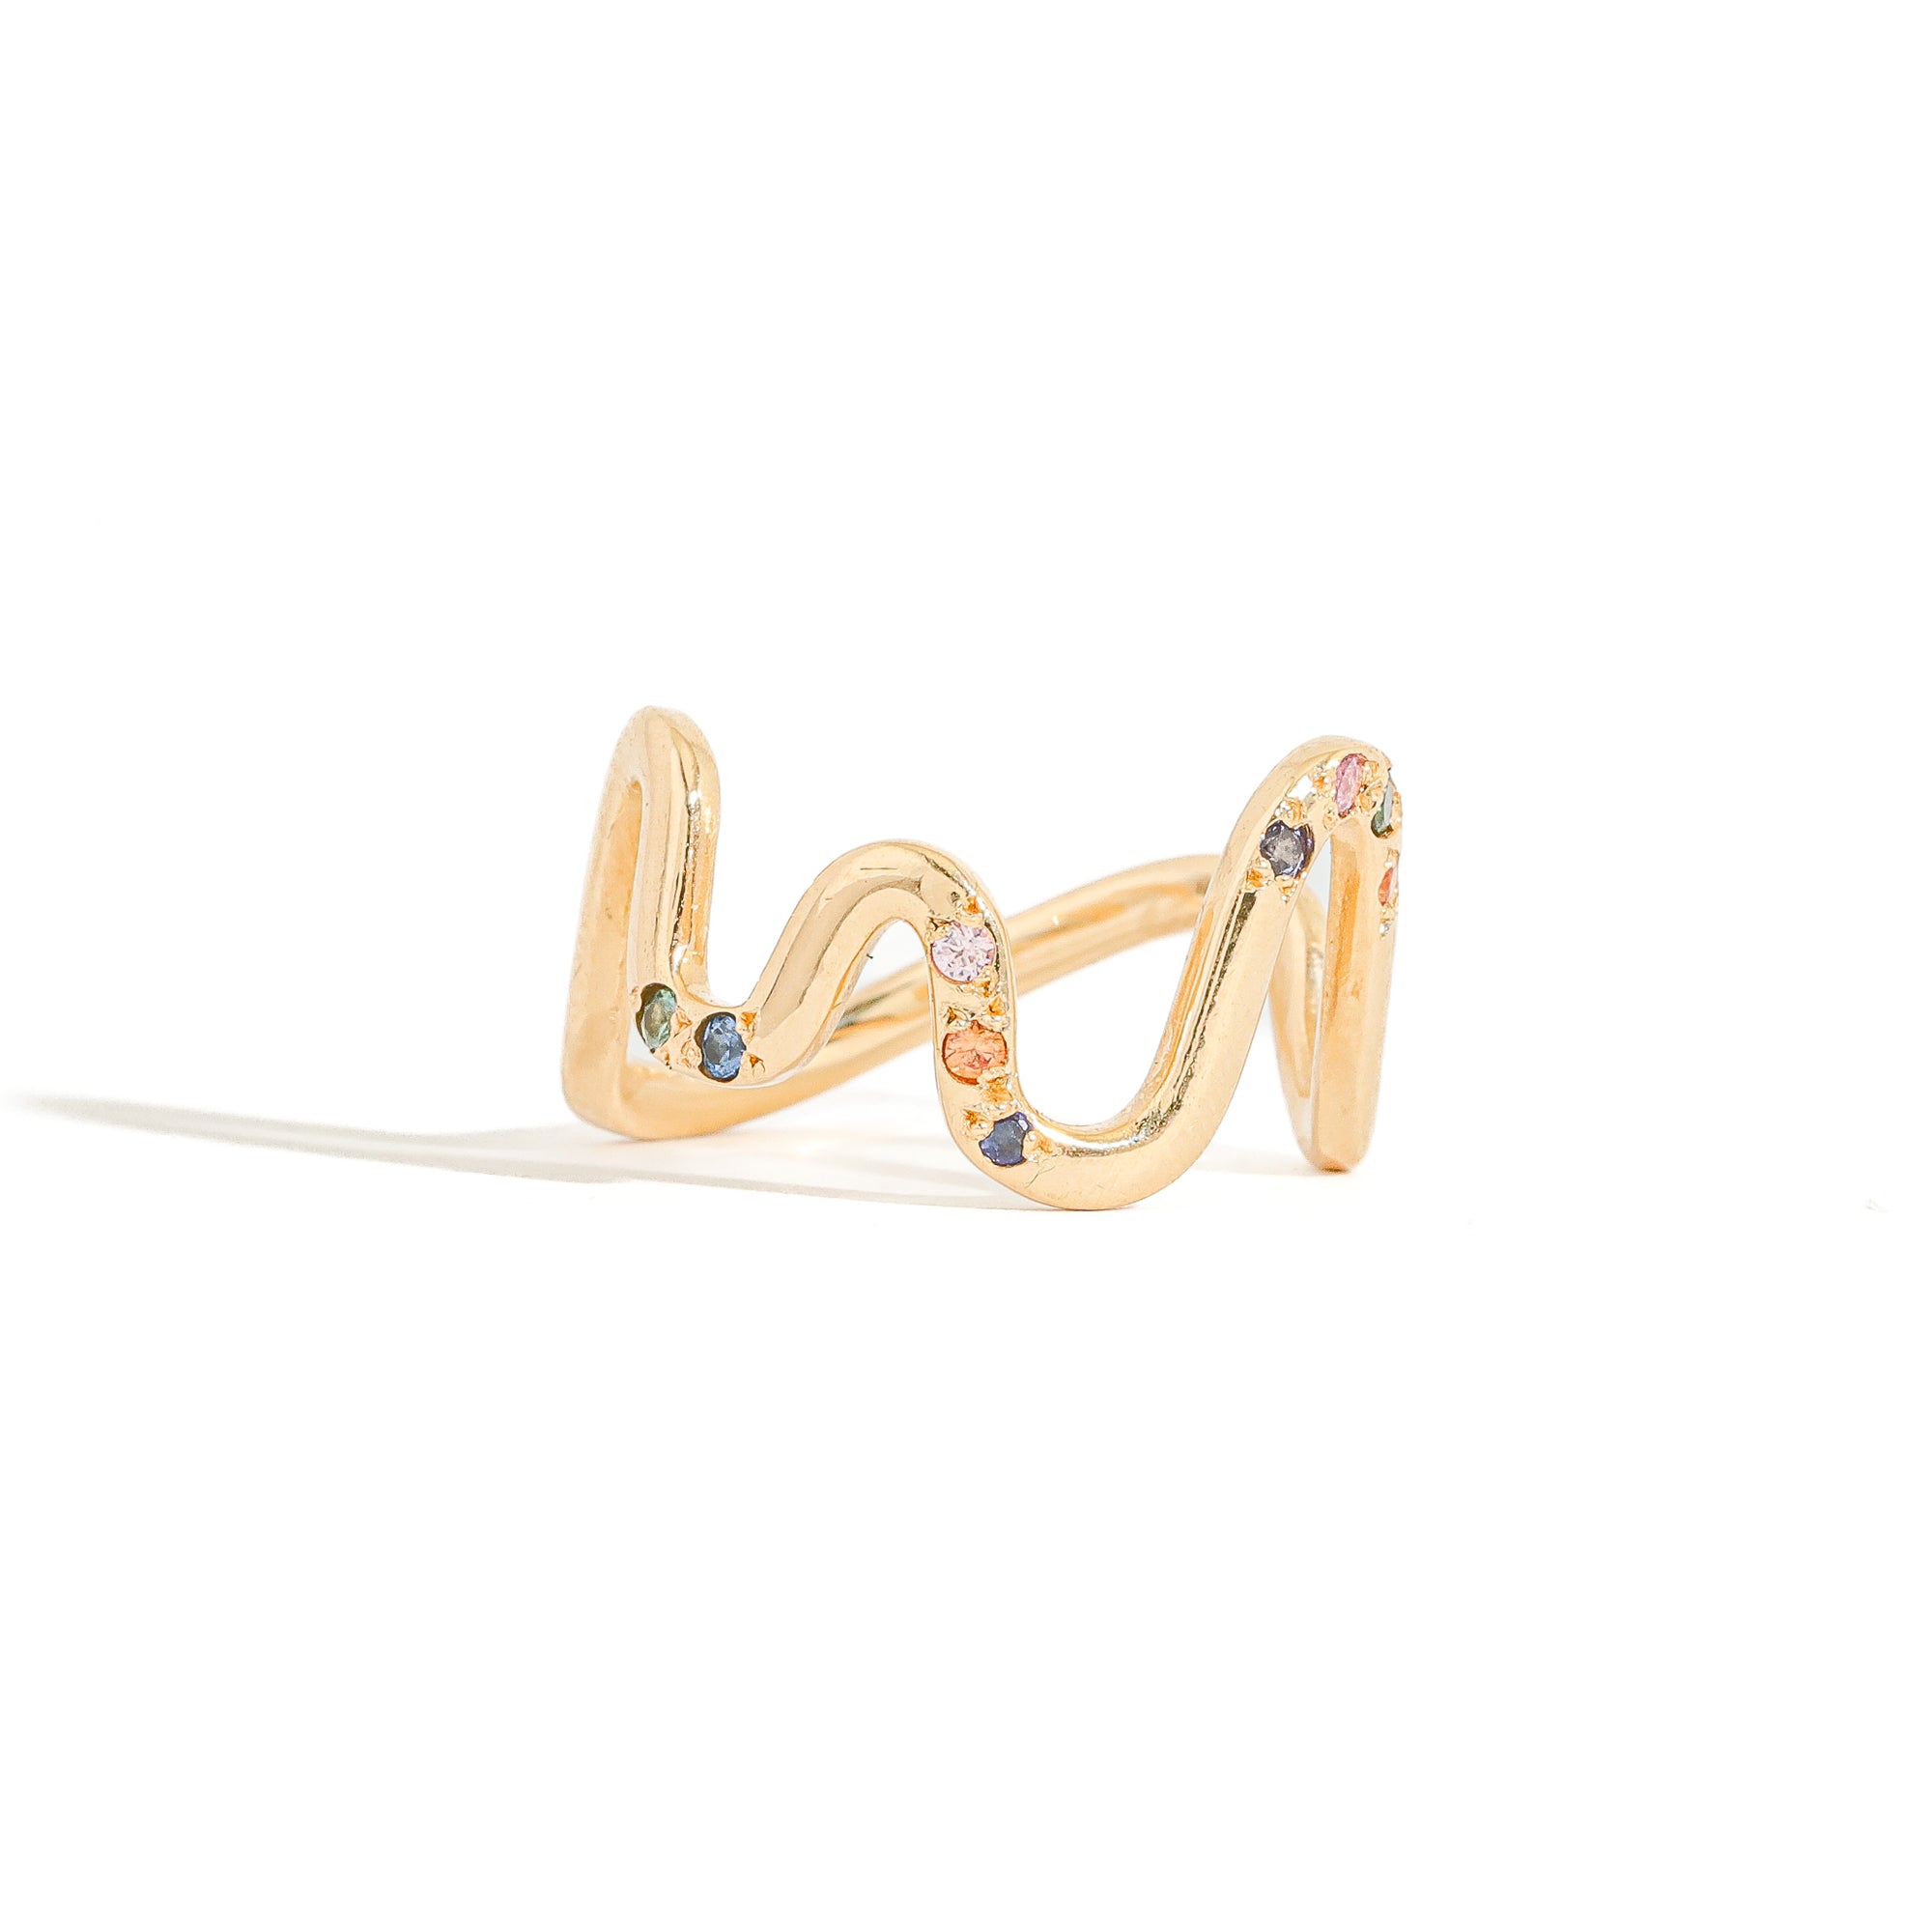 Solid 18ct Gold curved ring with clustered coloured sapphires